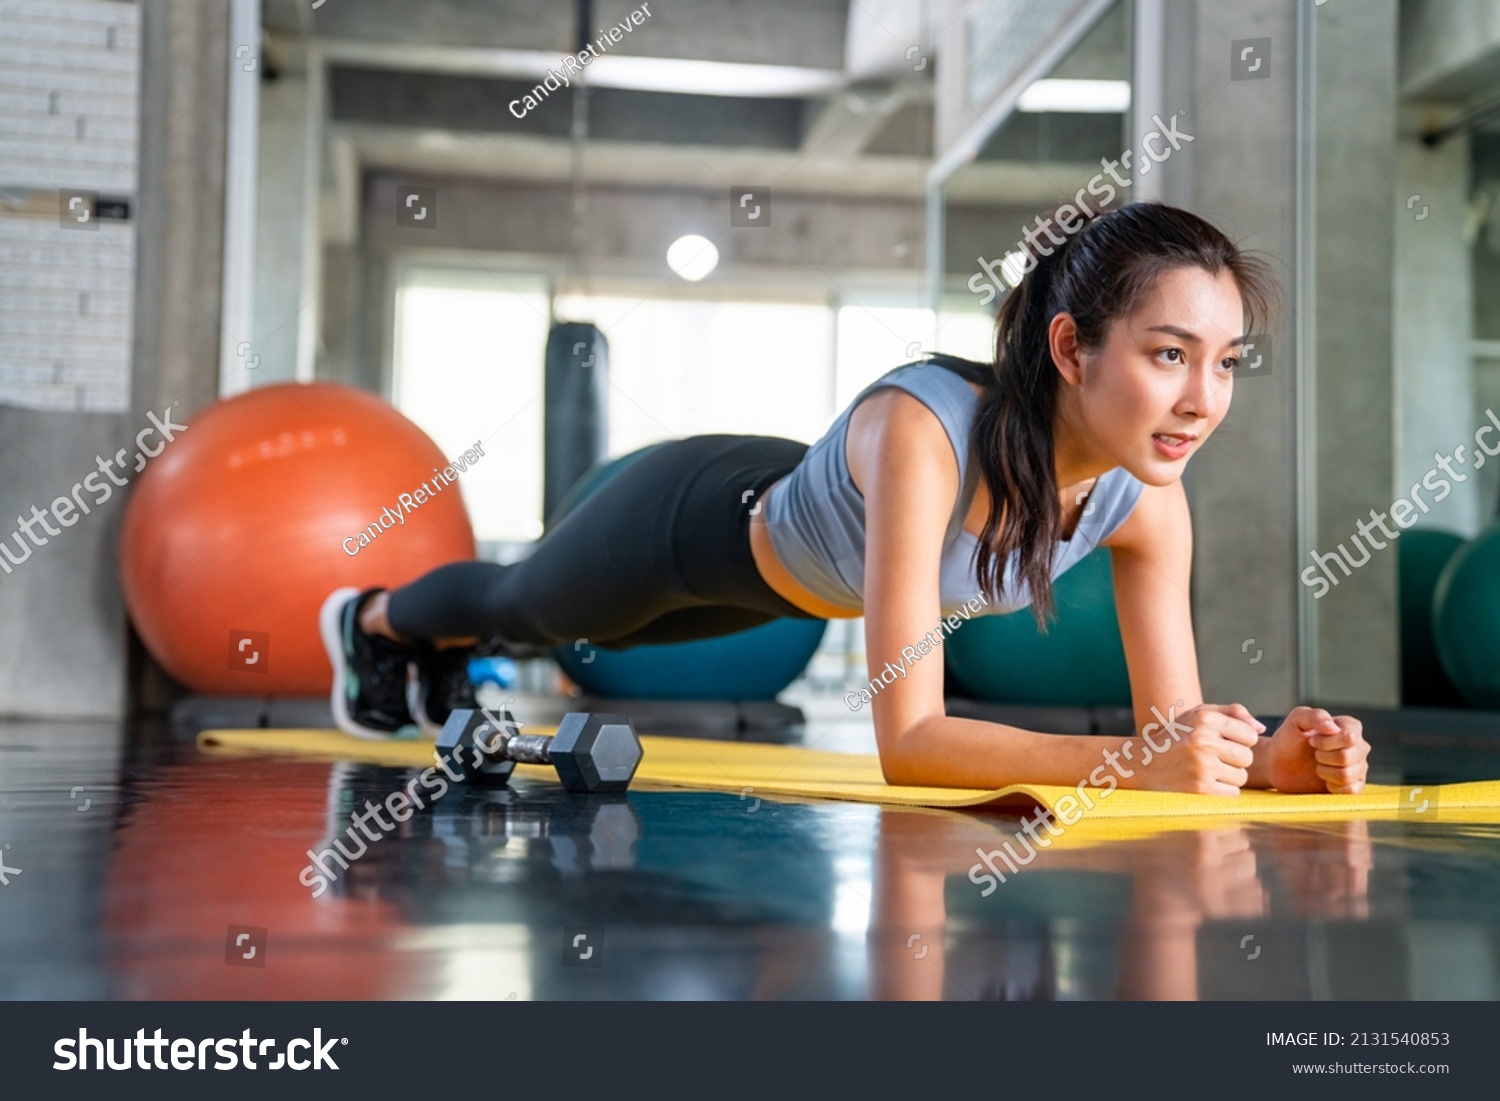 Healthy Asian athlete woman in sportswear do plank workout exercise body weight lifting at fitness gym. Strong female body building muscle weight training at sport club. Health care motivation concept #2131540853